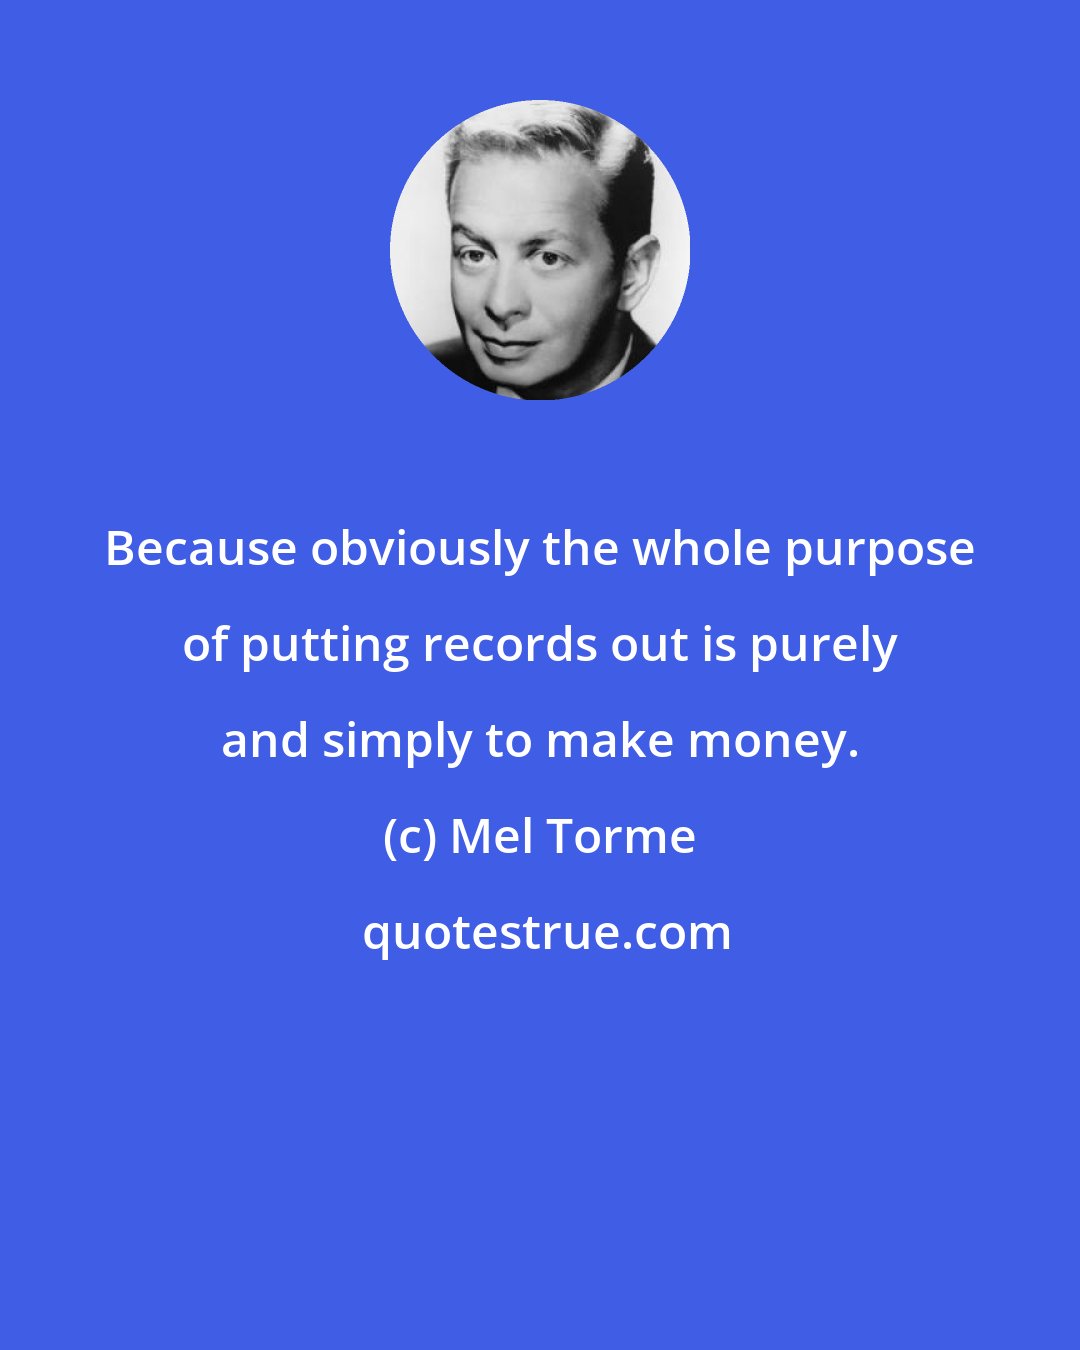 Mel Torme: Because obviously the whole purpose of putting records out is purely and simply to make money.